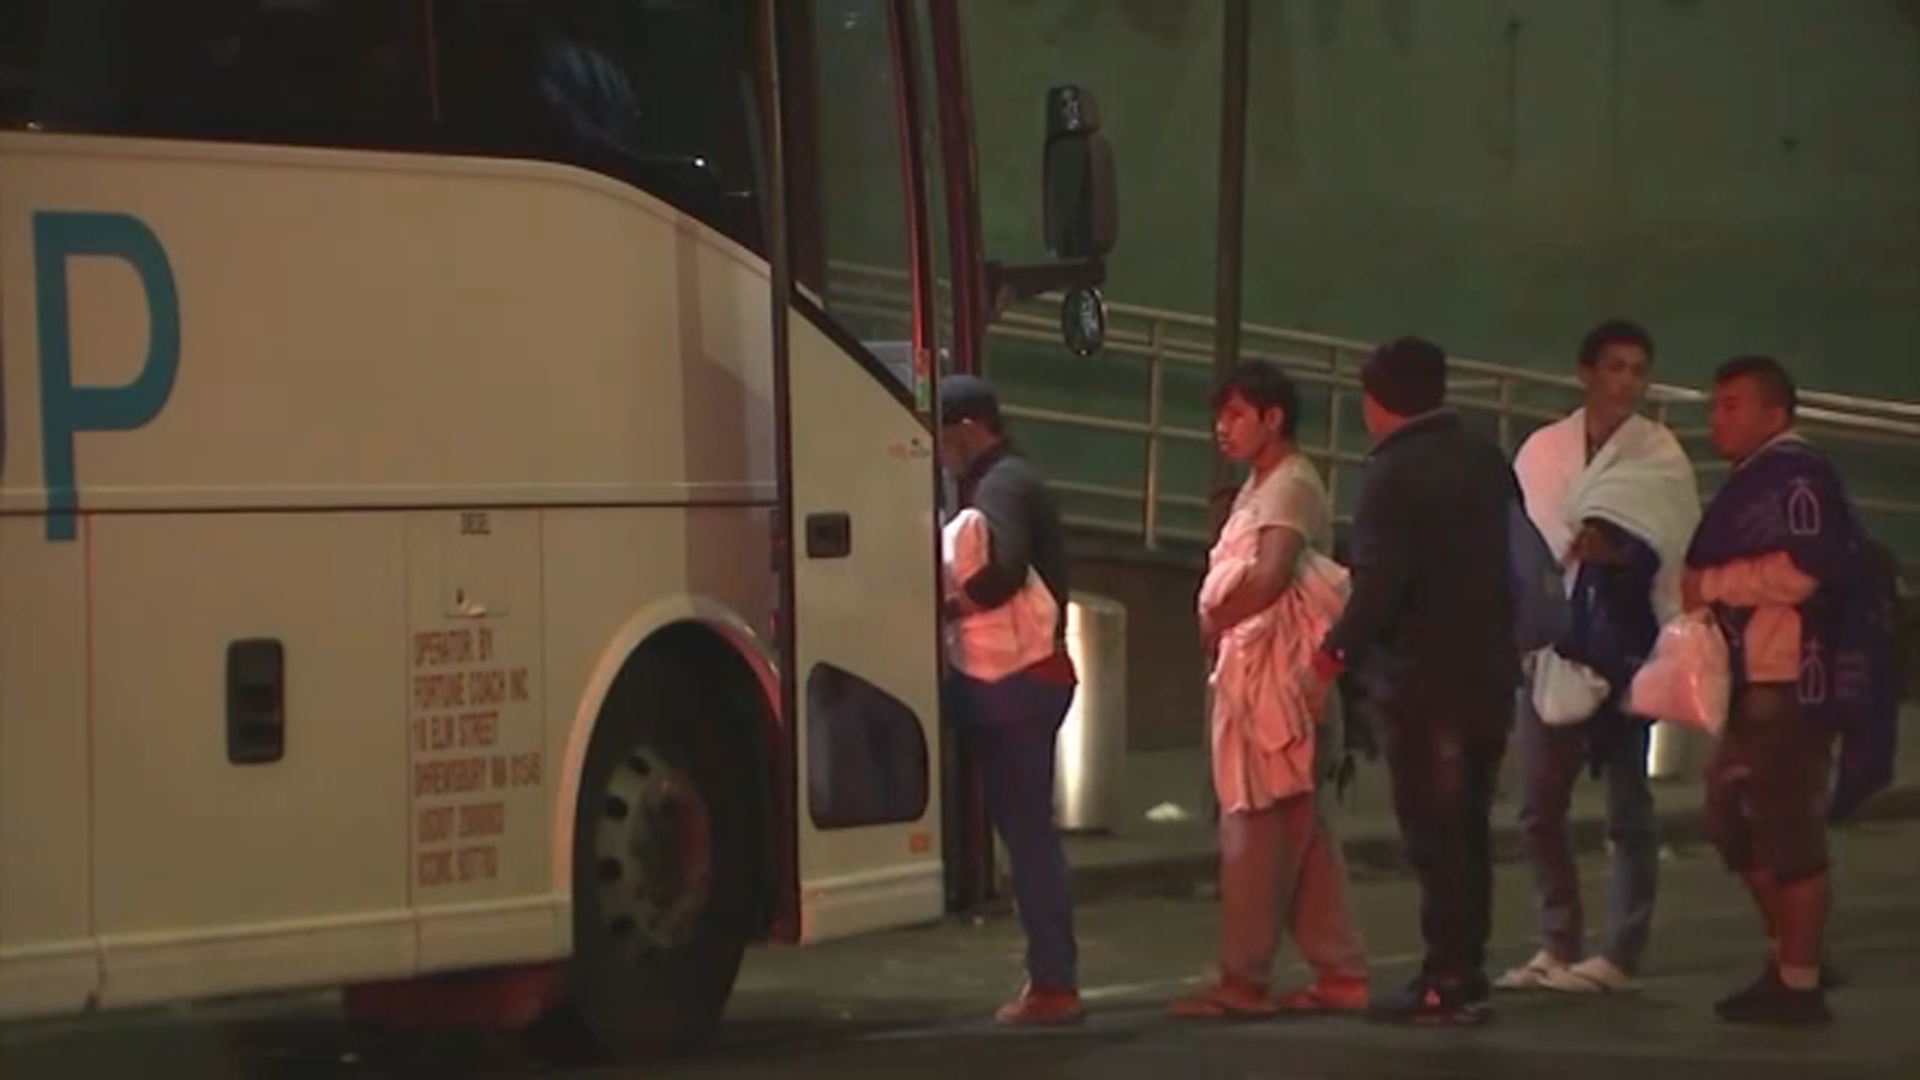 Migrants arrive by bus in NJ, take transit into NYC to avoid Mayor’s executive order